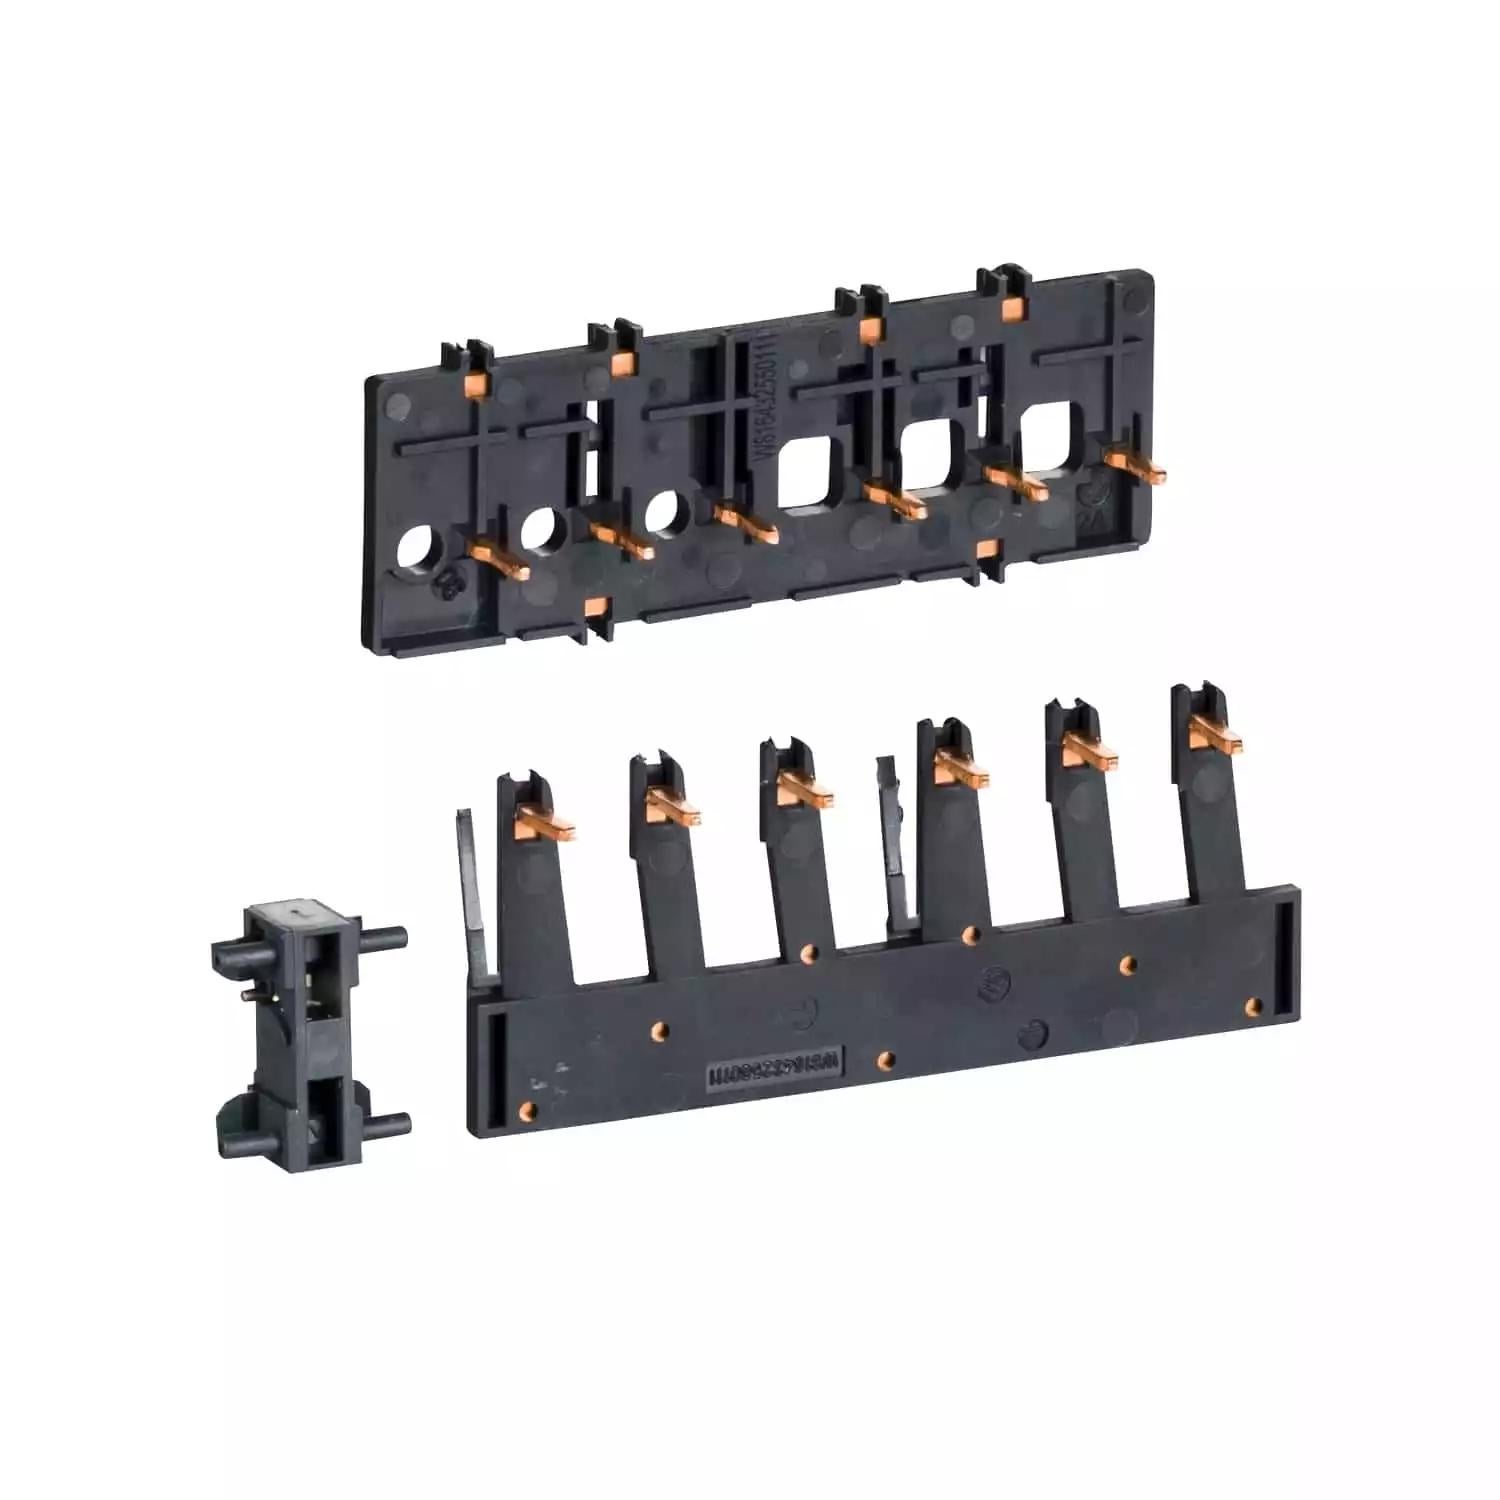 Kit for assembling 3P reversing contactors, LC1D09-D38 with screw clamp terminals, without electrical interlock